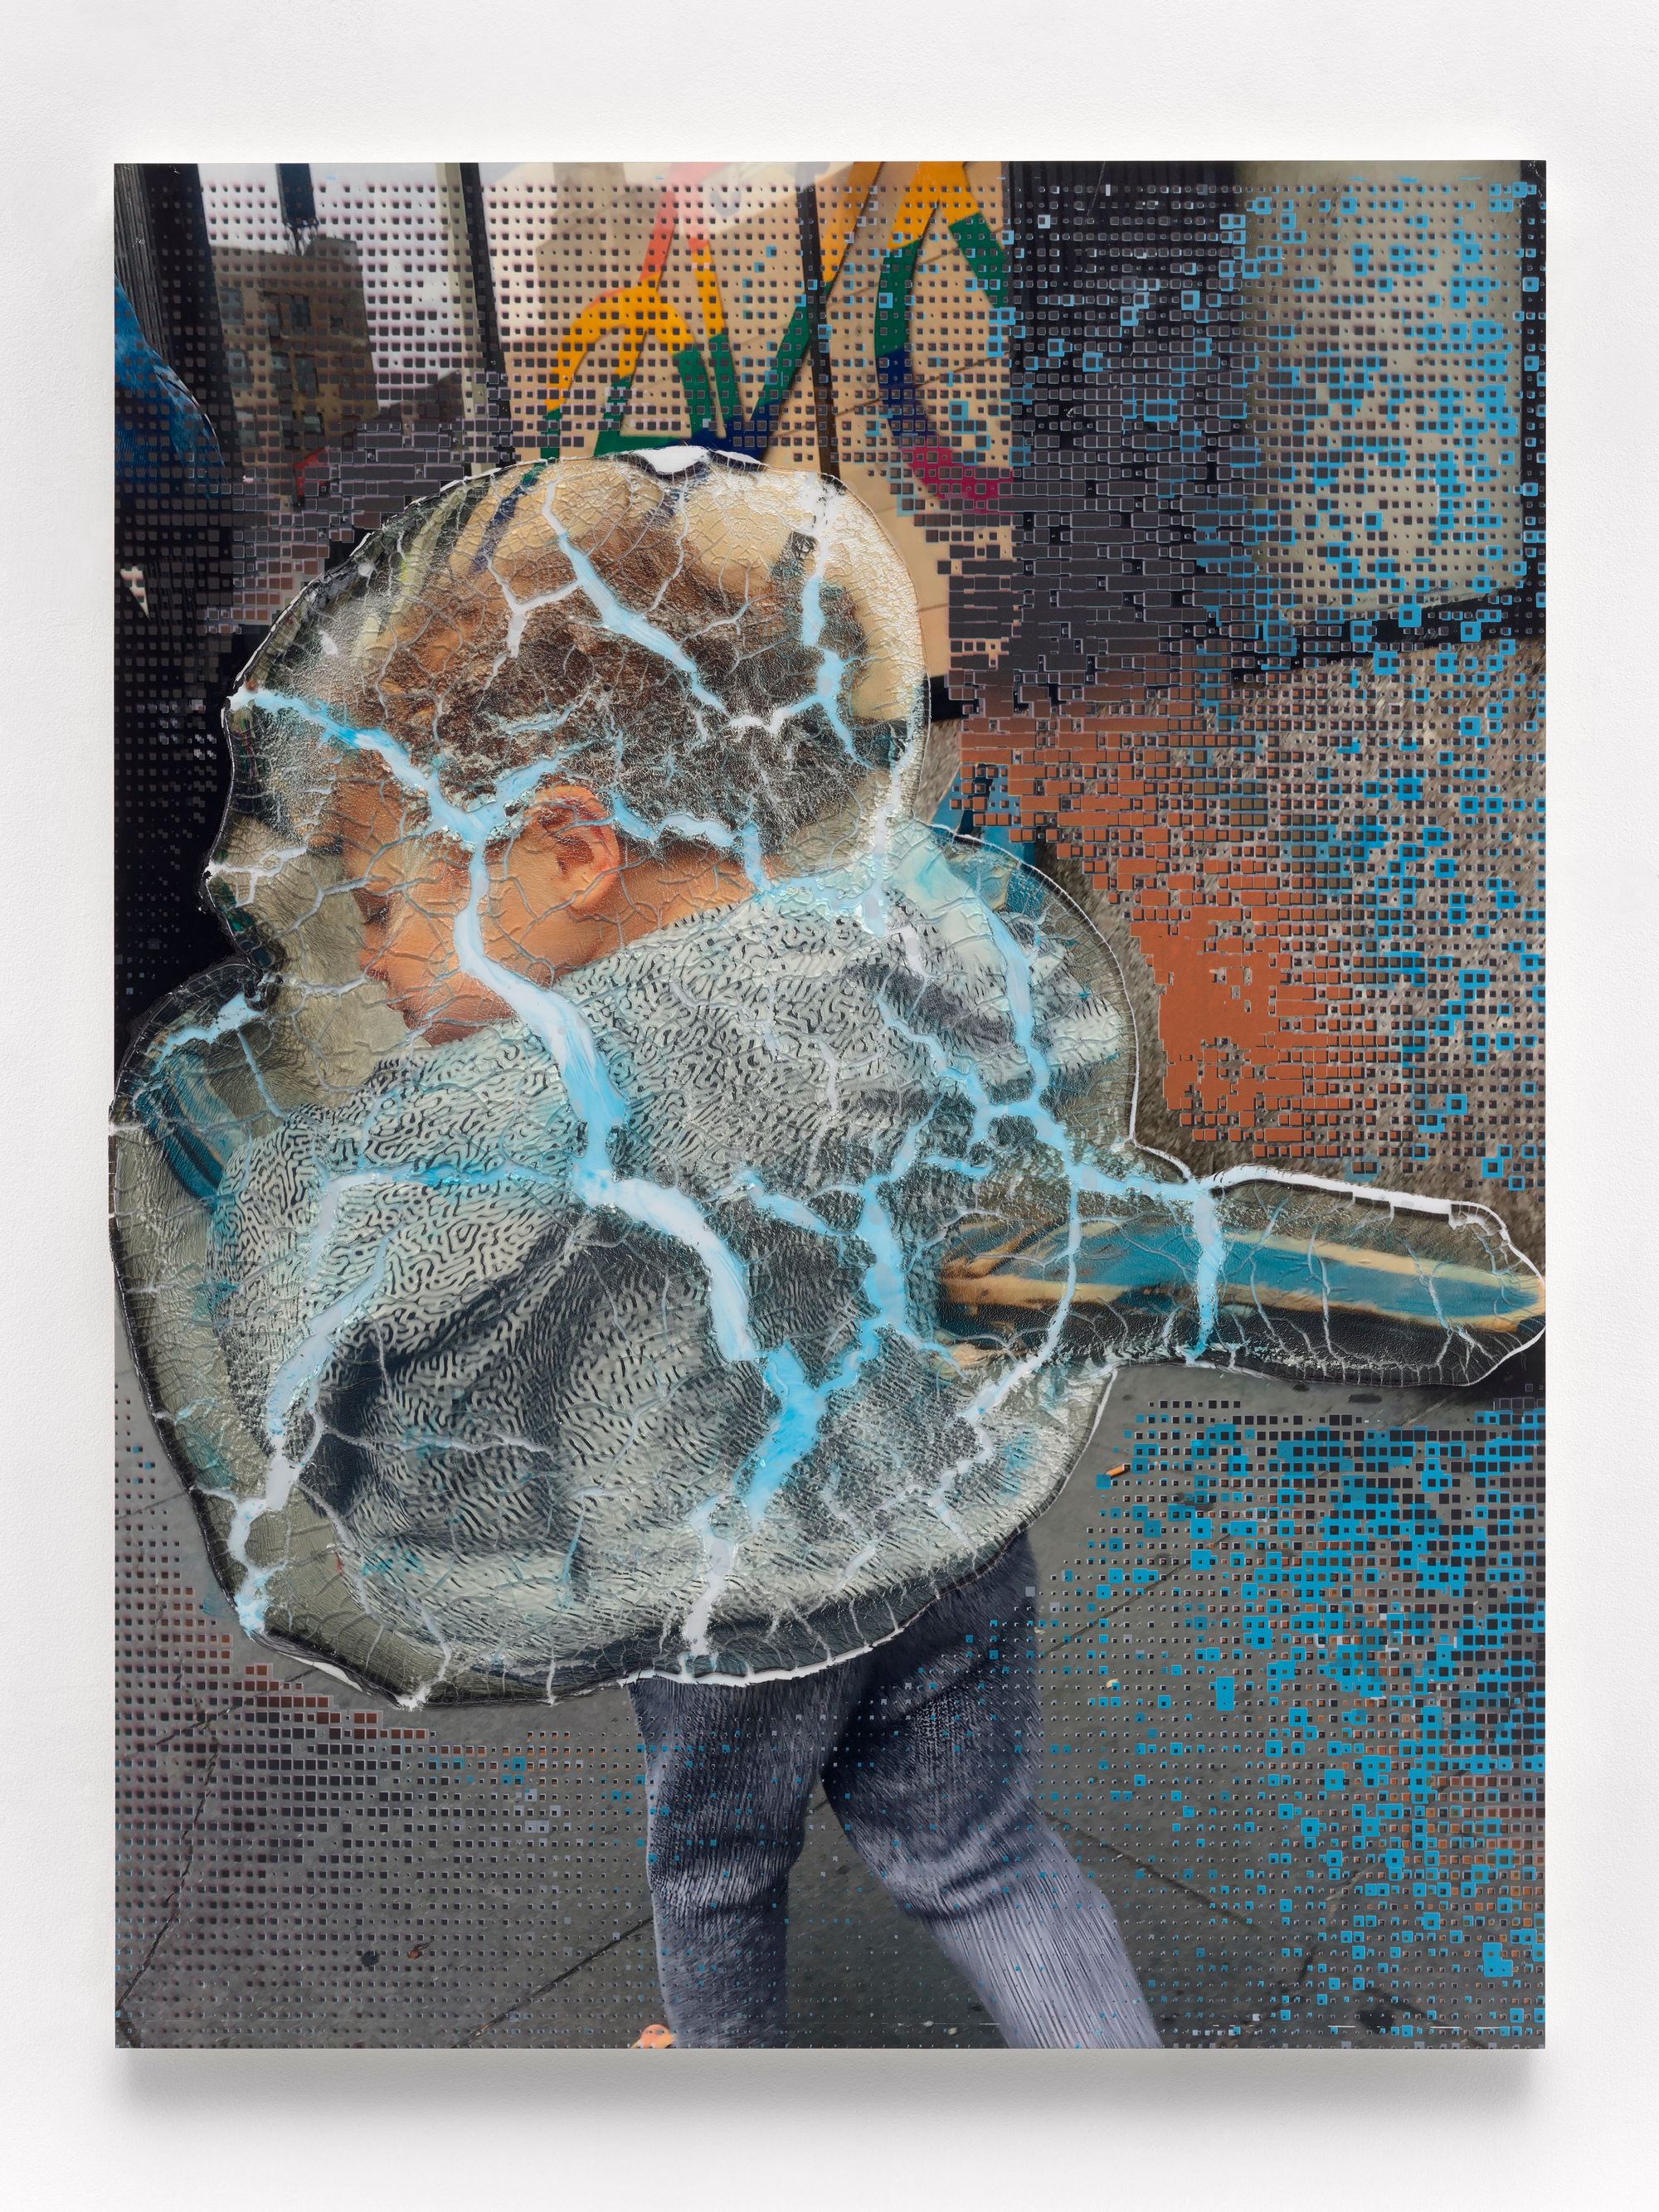 Seth Price, Social Space: Rainbow Signal, Cracked Police Barrier, Boy with Virus Pattern, 2019 Acrylic polymer, acrylic paint, inkjet on plastic, UV-cured inkjet, wood, metal, 55.25 x 42 inches. Courtesy of the artist and Petzel, New York.